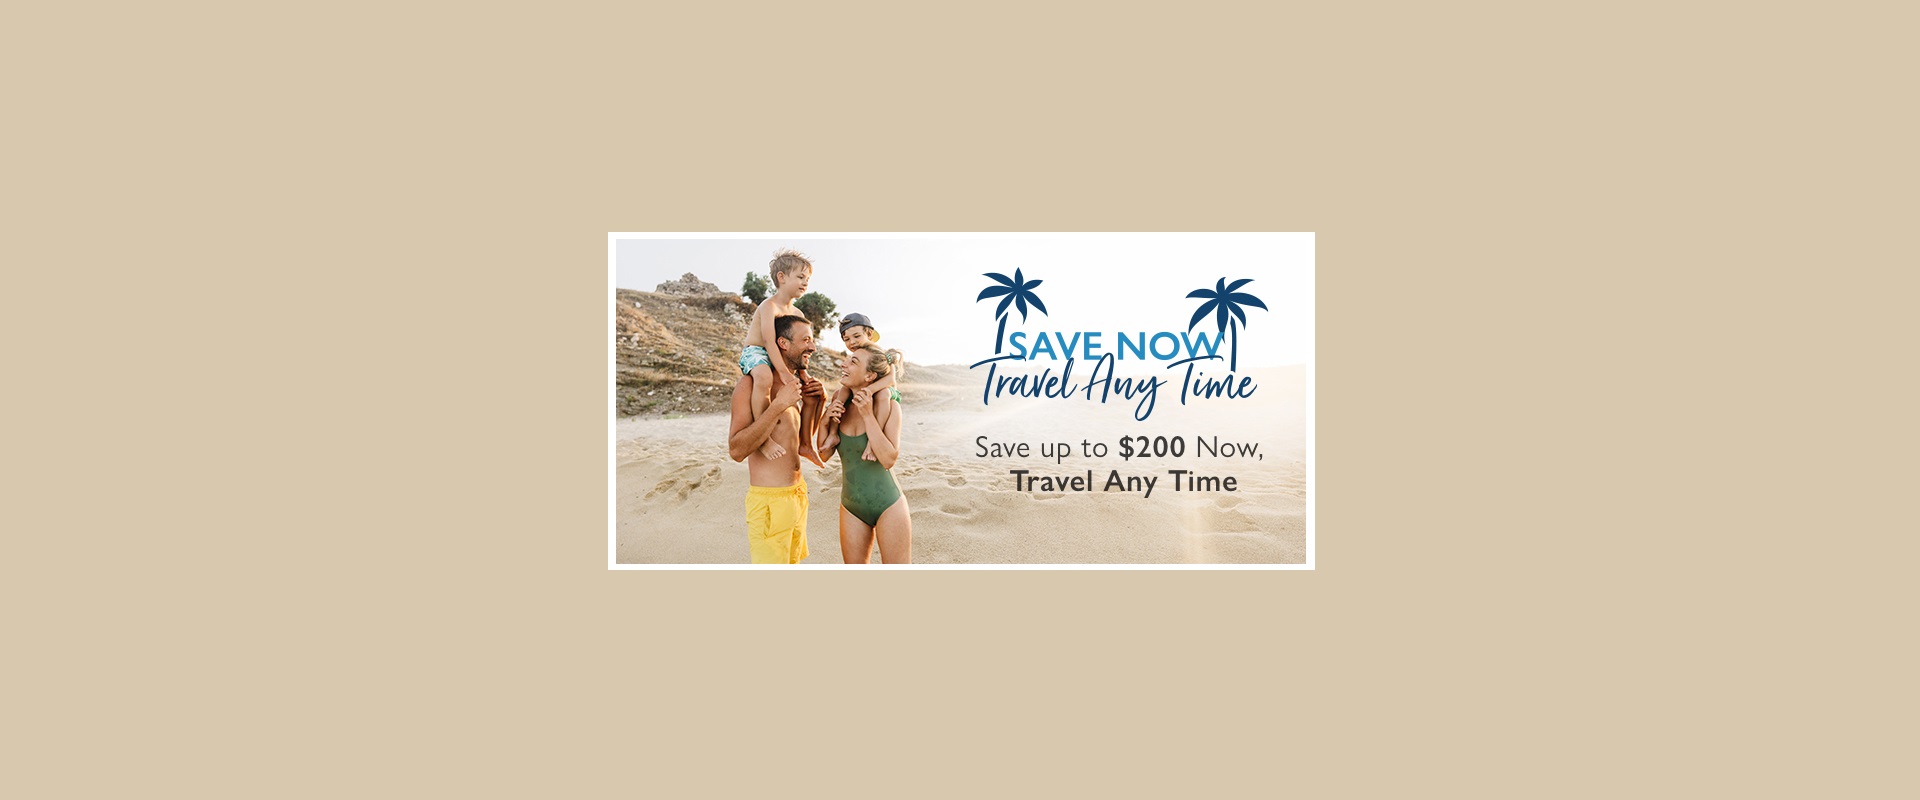 Save-Now-Travel-Any-Time-Header